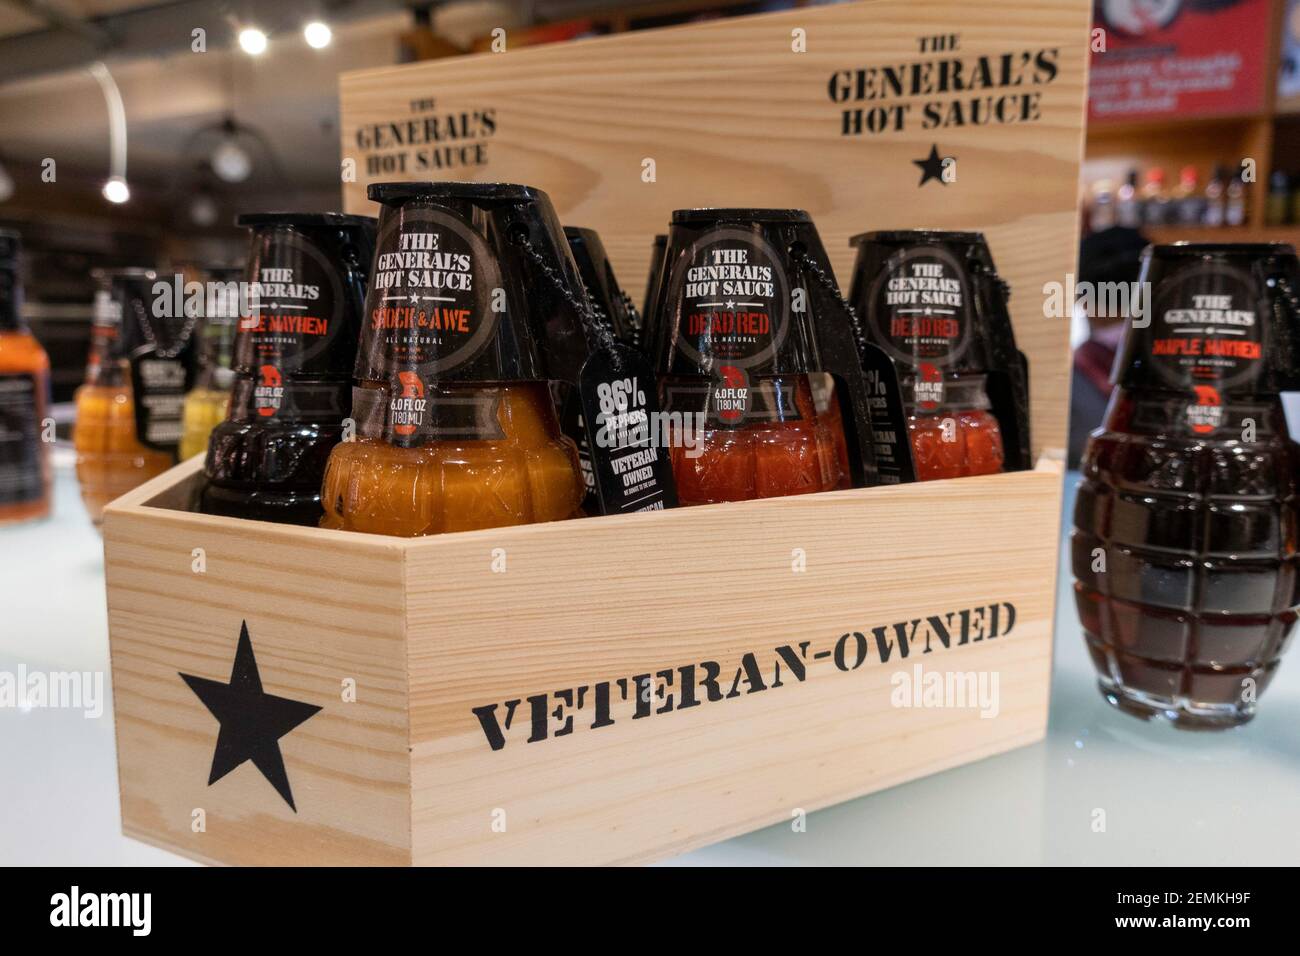 The General's Hot Sauce is American-made and for sale in Grand Central Market gourmet shopping destination , NYC, USA Stock Photo